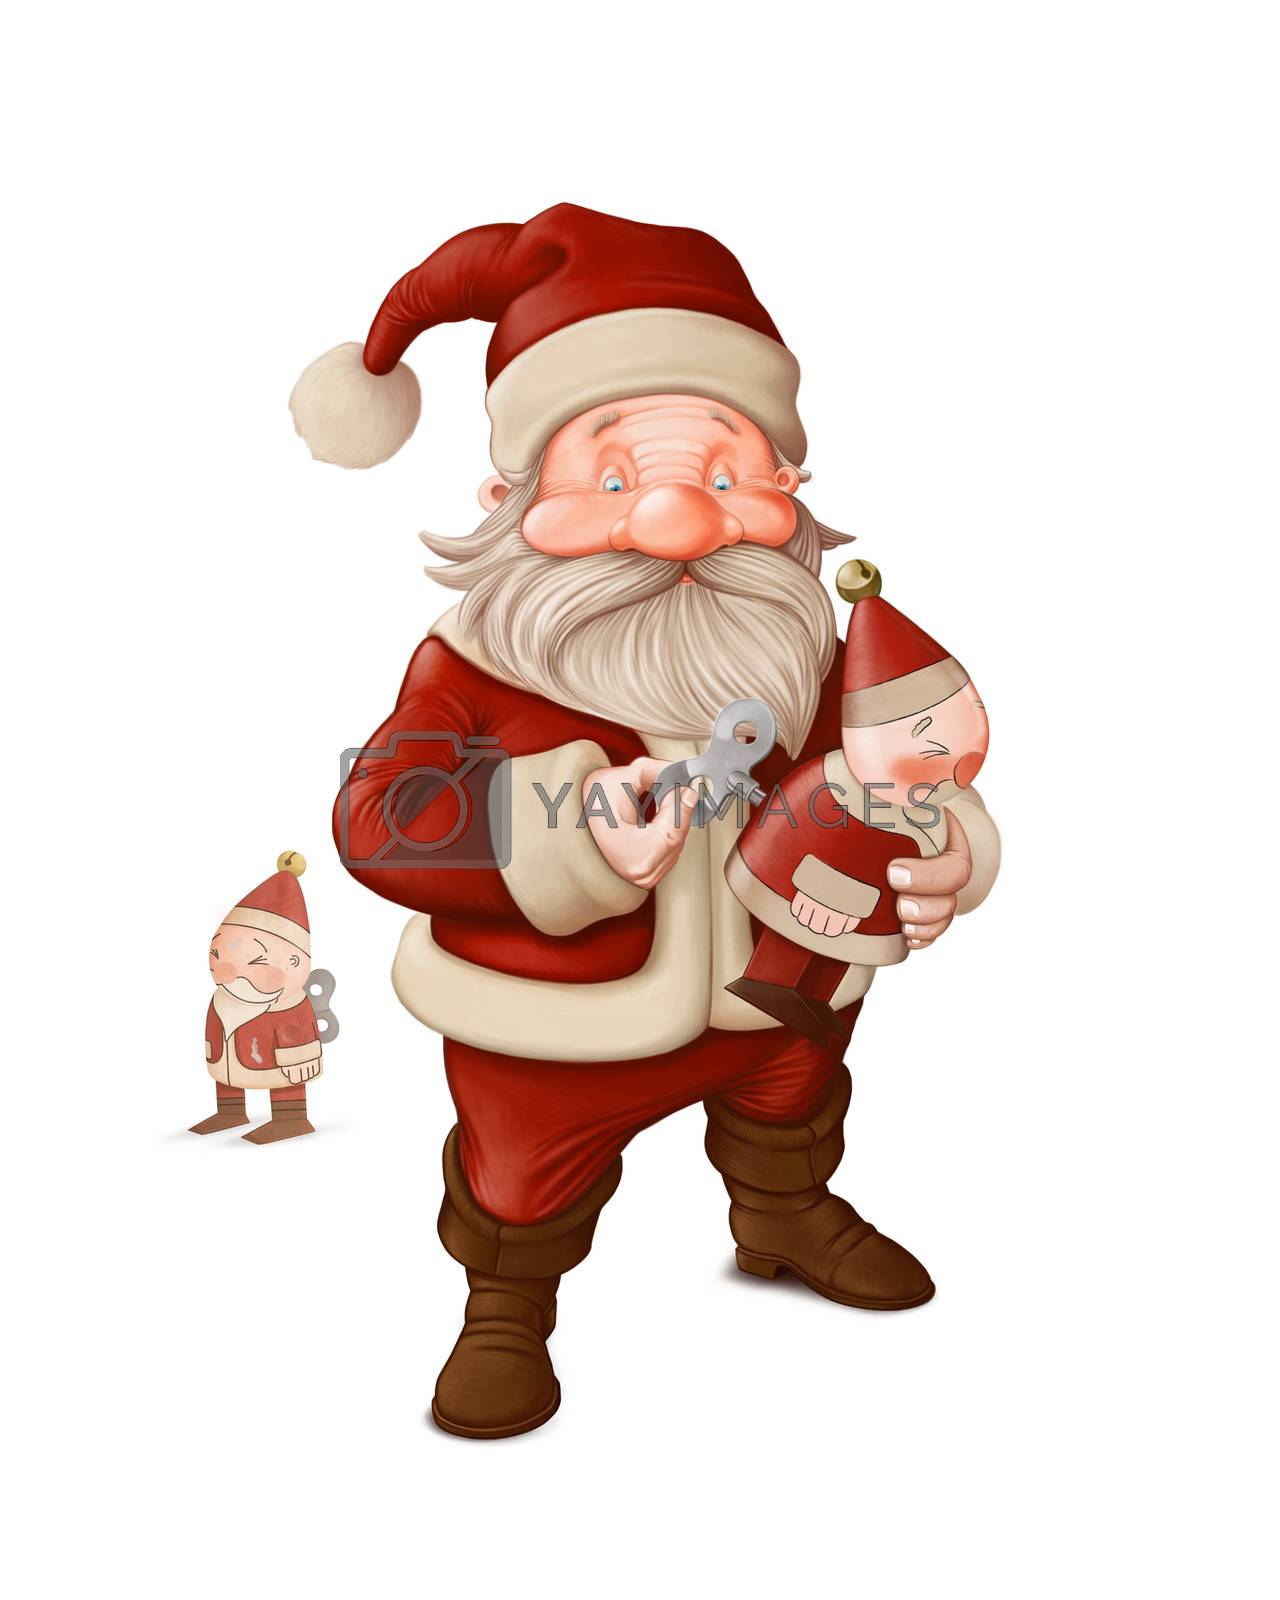 Royalty free image of Santa Claus and mechanical doll by jordygraph